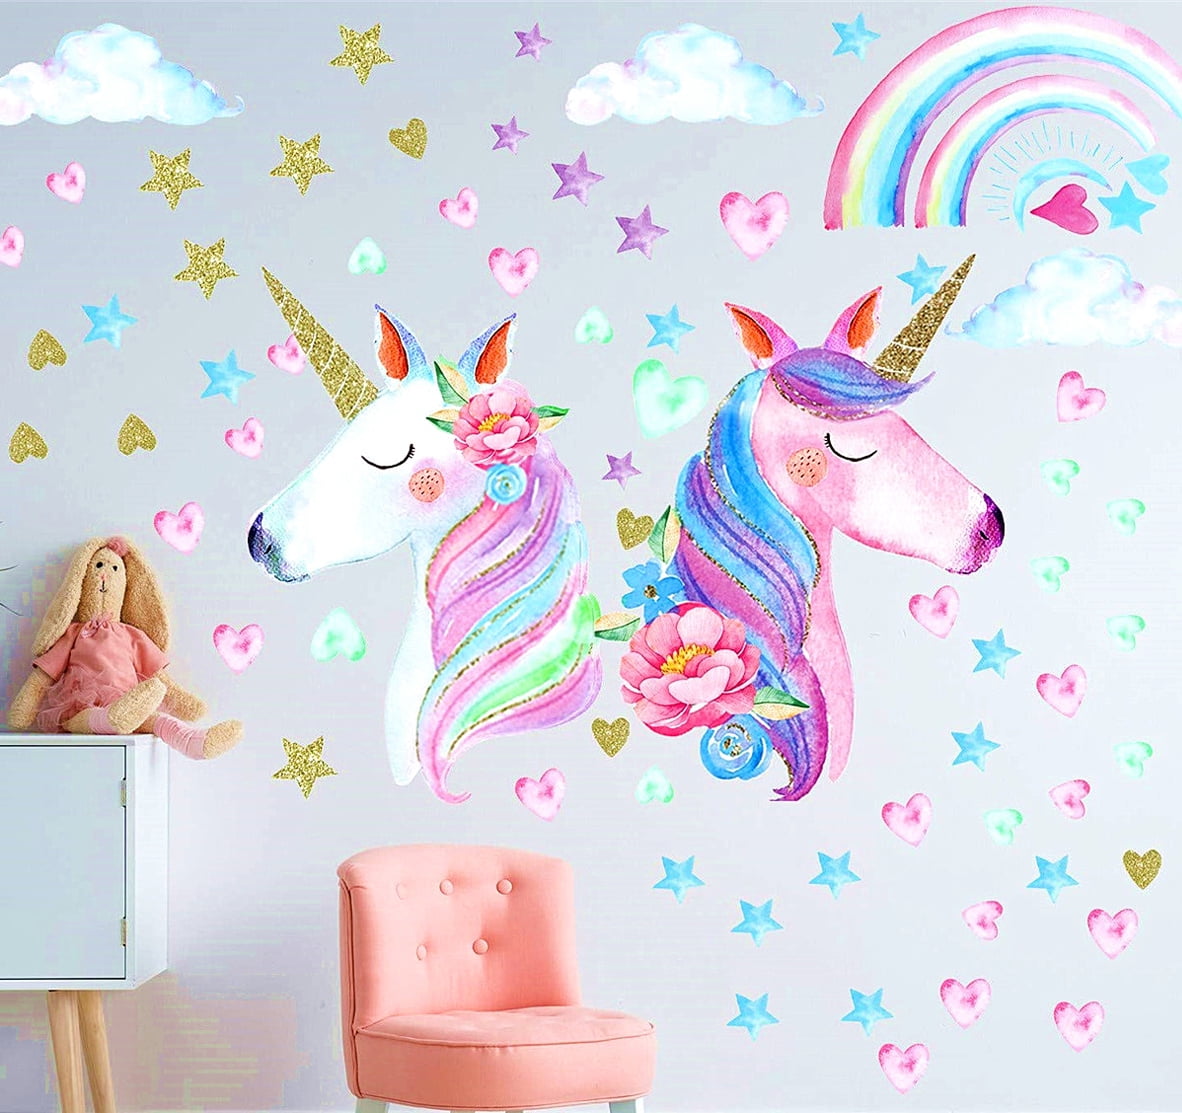 Large Size Unicorn Rainbow Wall Decor for Girls Kids Bedroom Nursery Christmas Birthday Party Decoration TEUN 3 Sheets Unicorn Wall Decal Stickers